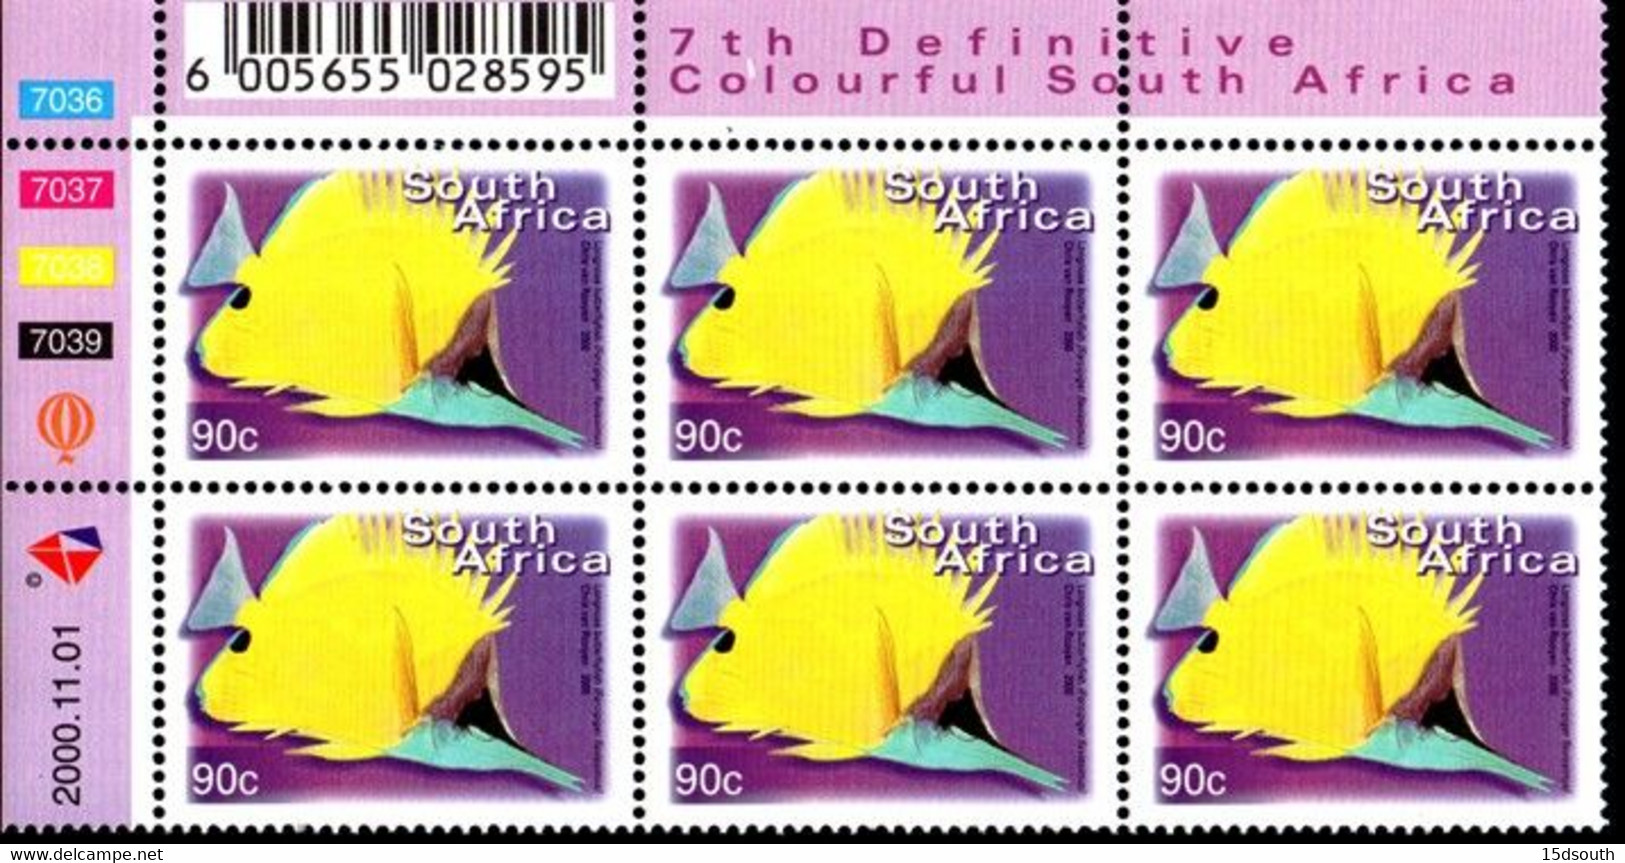 South Africa - 2000 7th Definitive Fauna And Flora 90c Control Block (**) (2000.11.01) - Blocks & Sheetlets